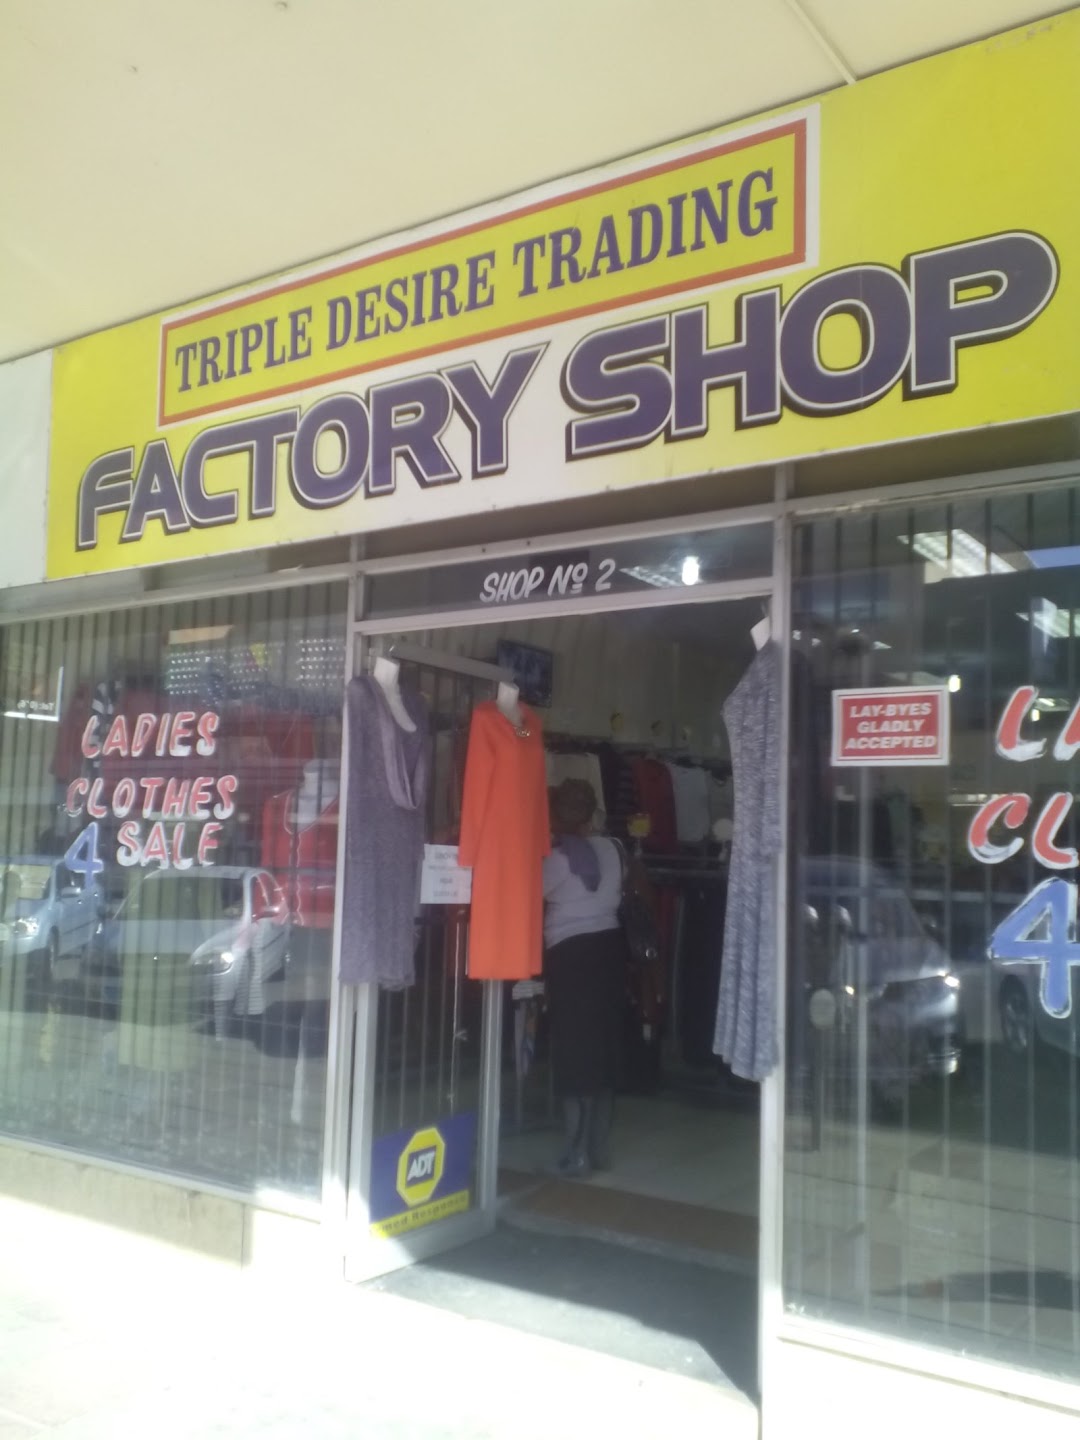 Tripple Desire Trading & Projects 141 Factory Shop